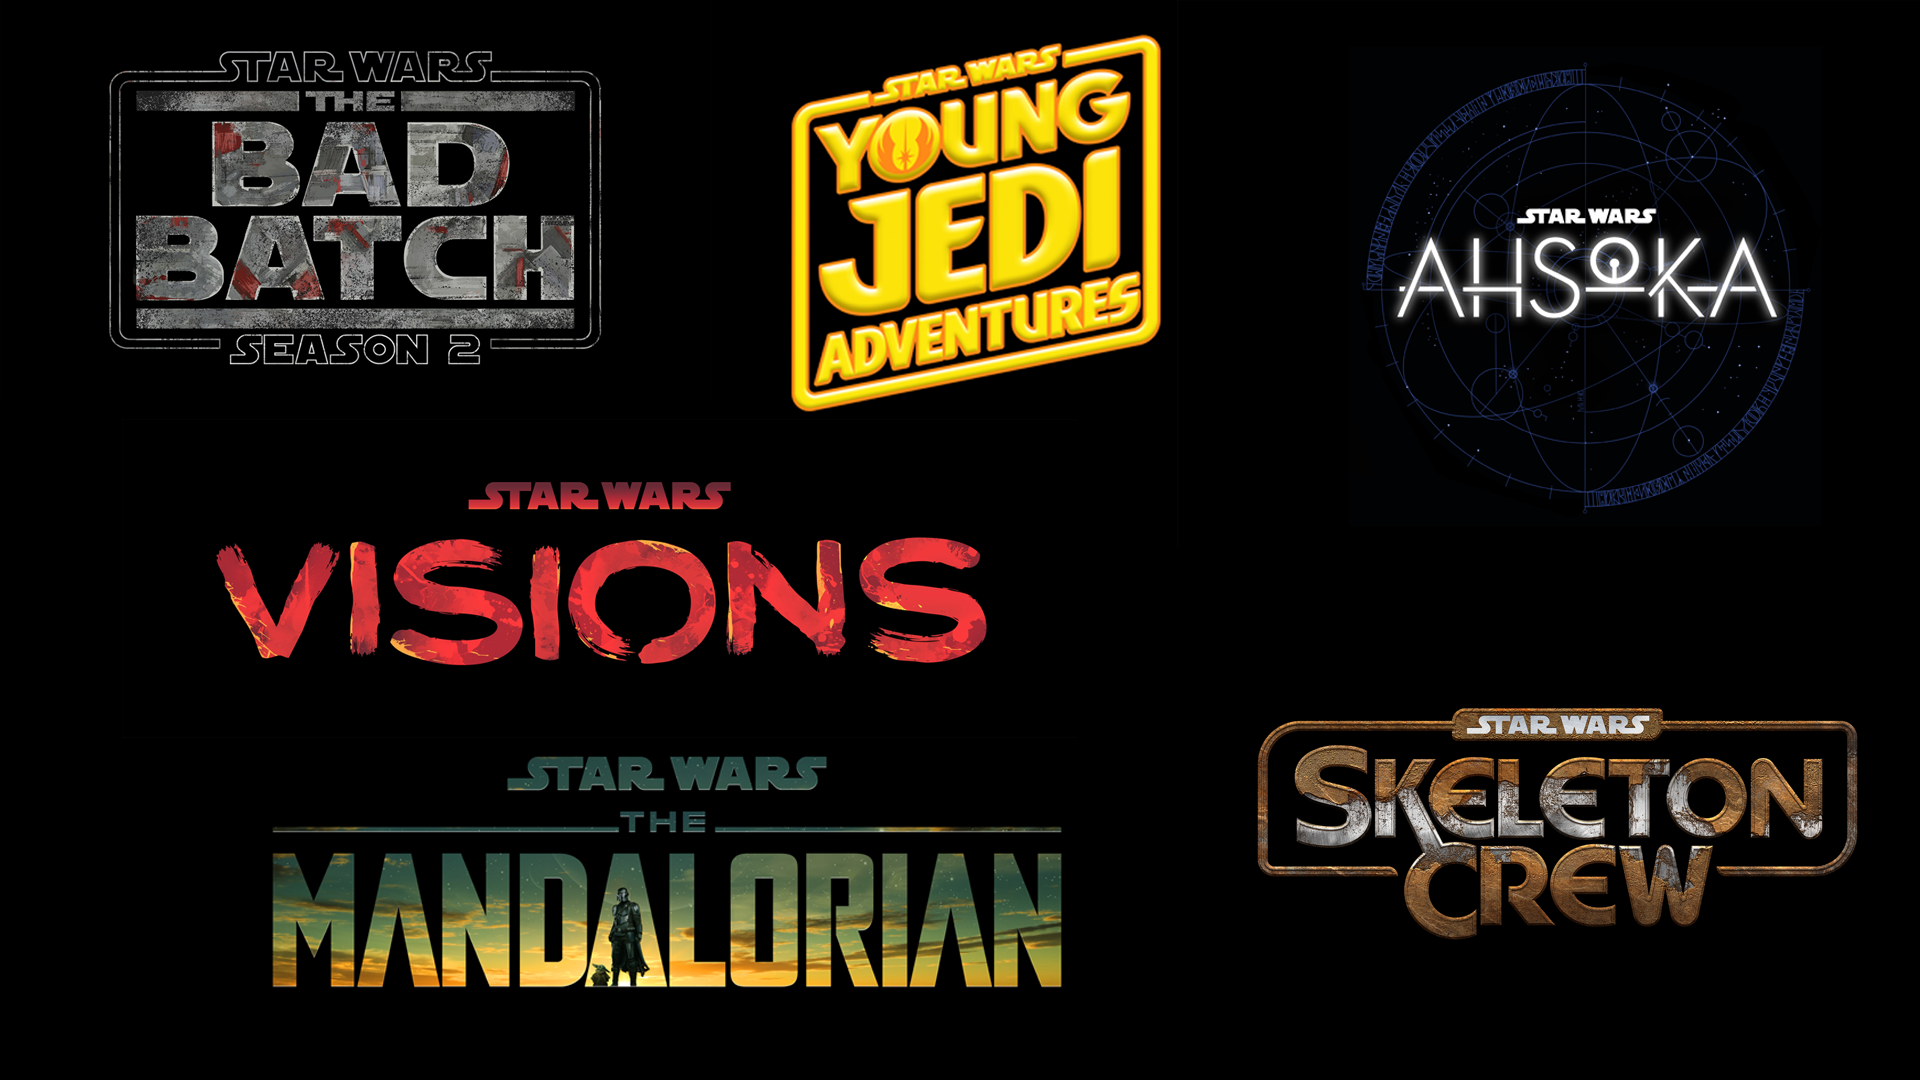 Disney Reveals Full List of 'Star Wars' Content With Synopses for 2023 - Star  Wars News Net